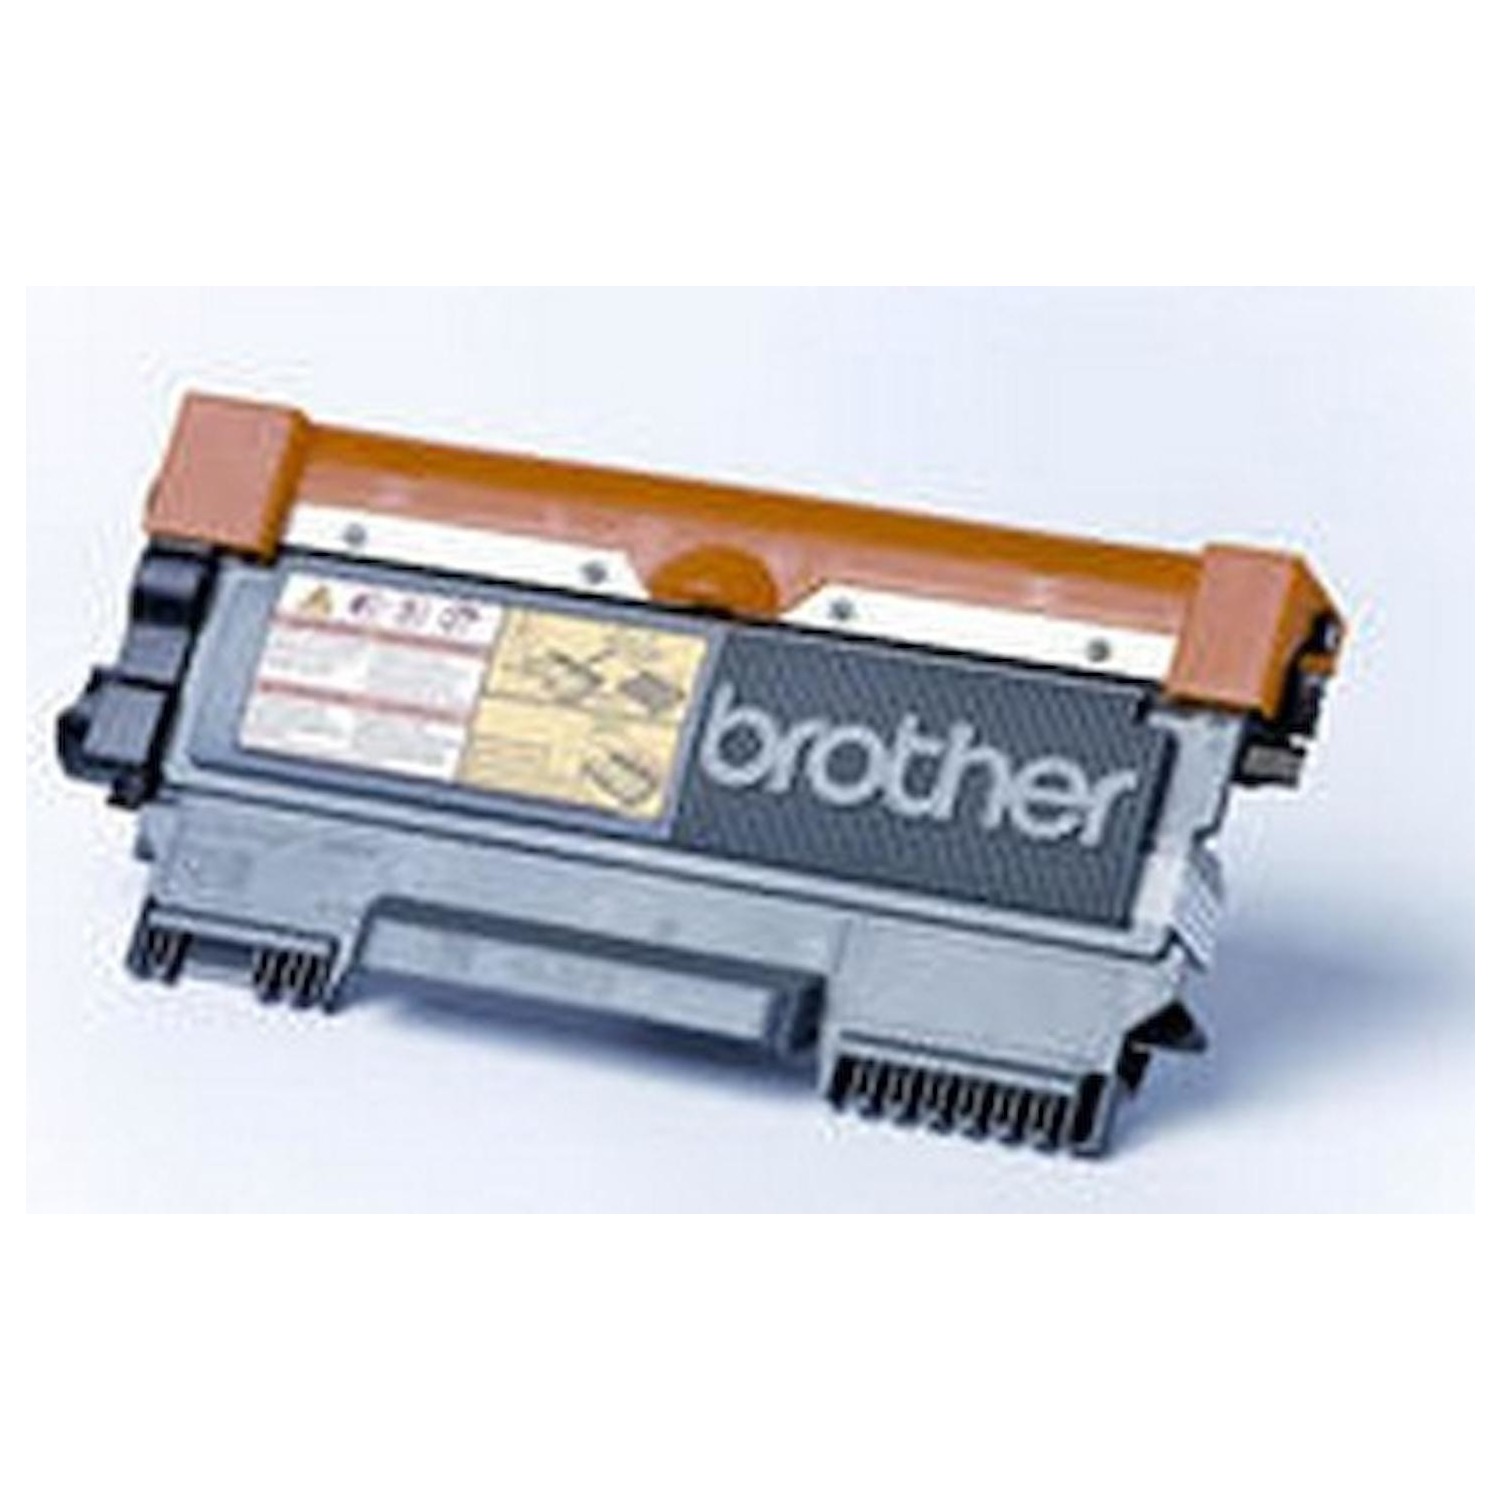 Toner Brother TN1050 per DCP1512A 1612W HL-1212W DCP1612W MFC1810